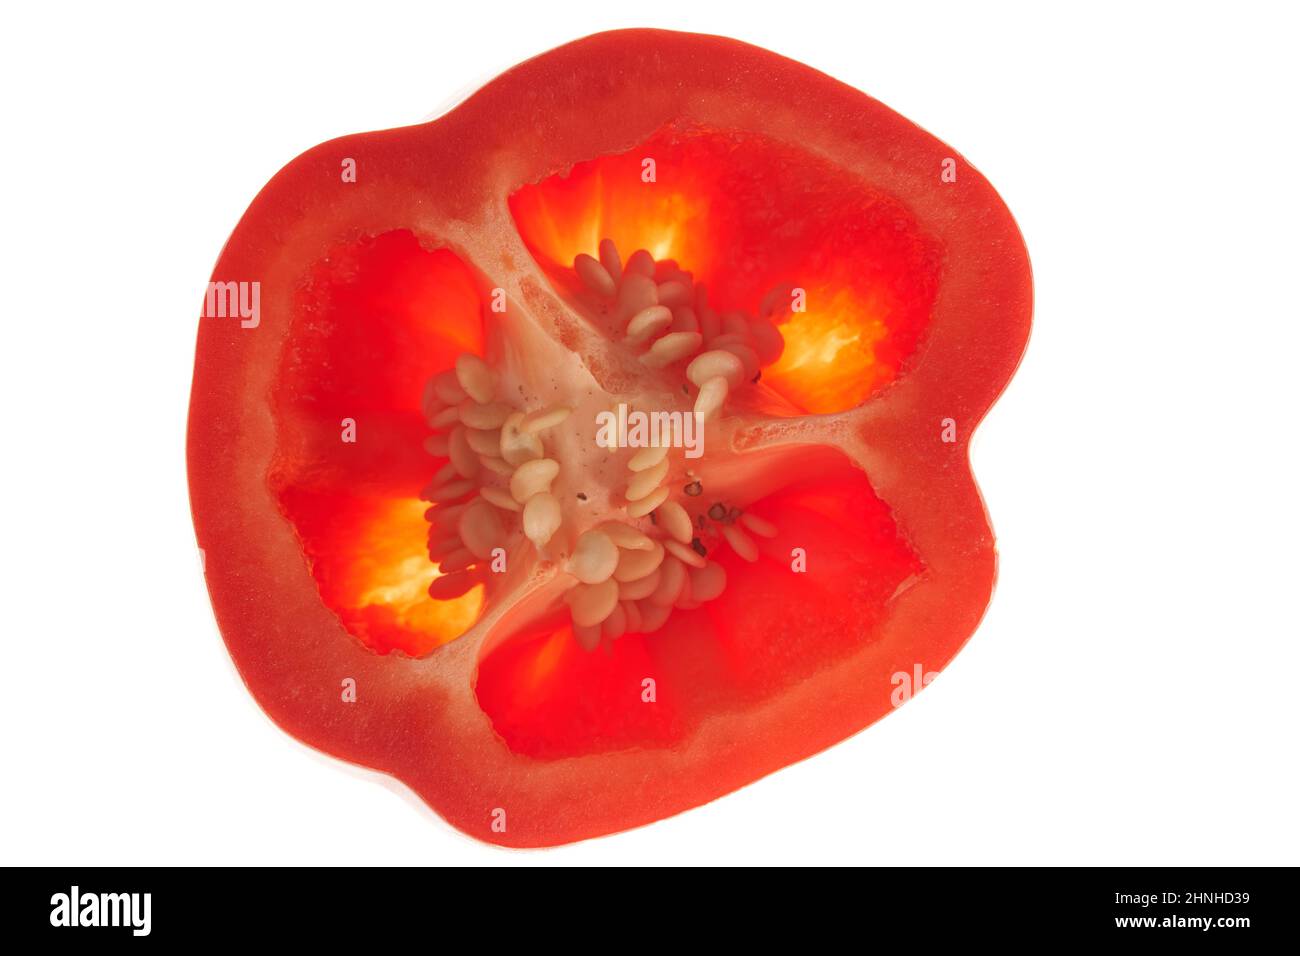 Close-up of a piece of sweet red bell pepper with seeds inside. Isolated on a white background.A piece of red pepper halves. High quality photo Stock Photo